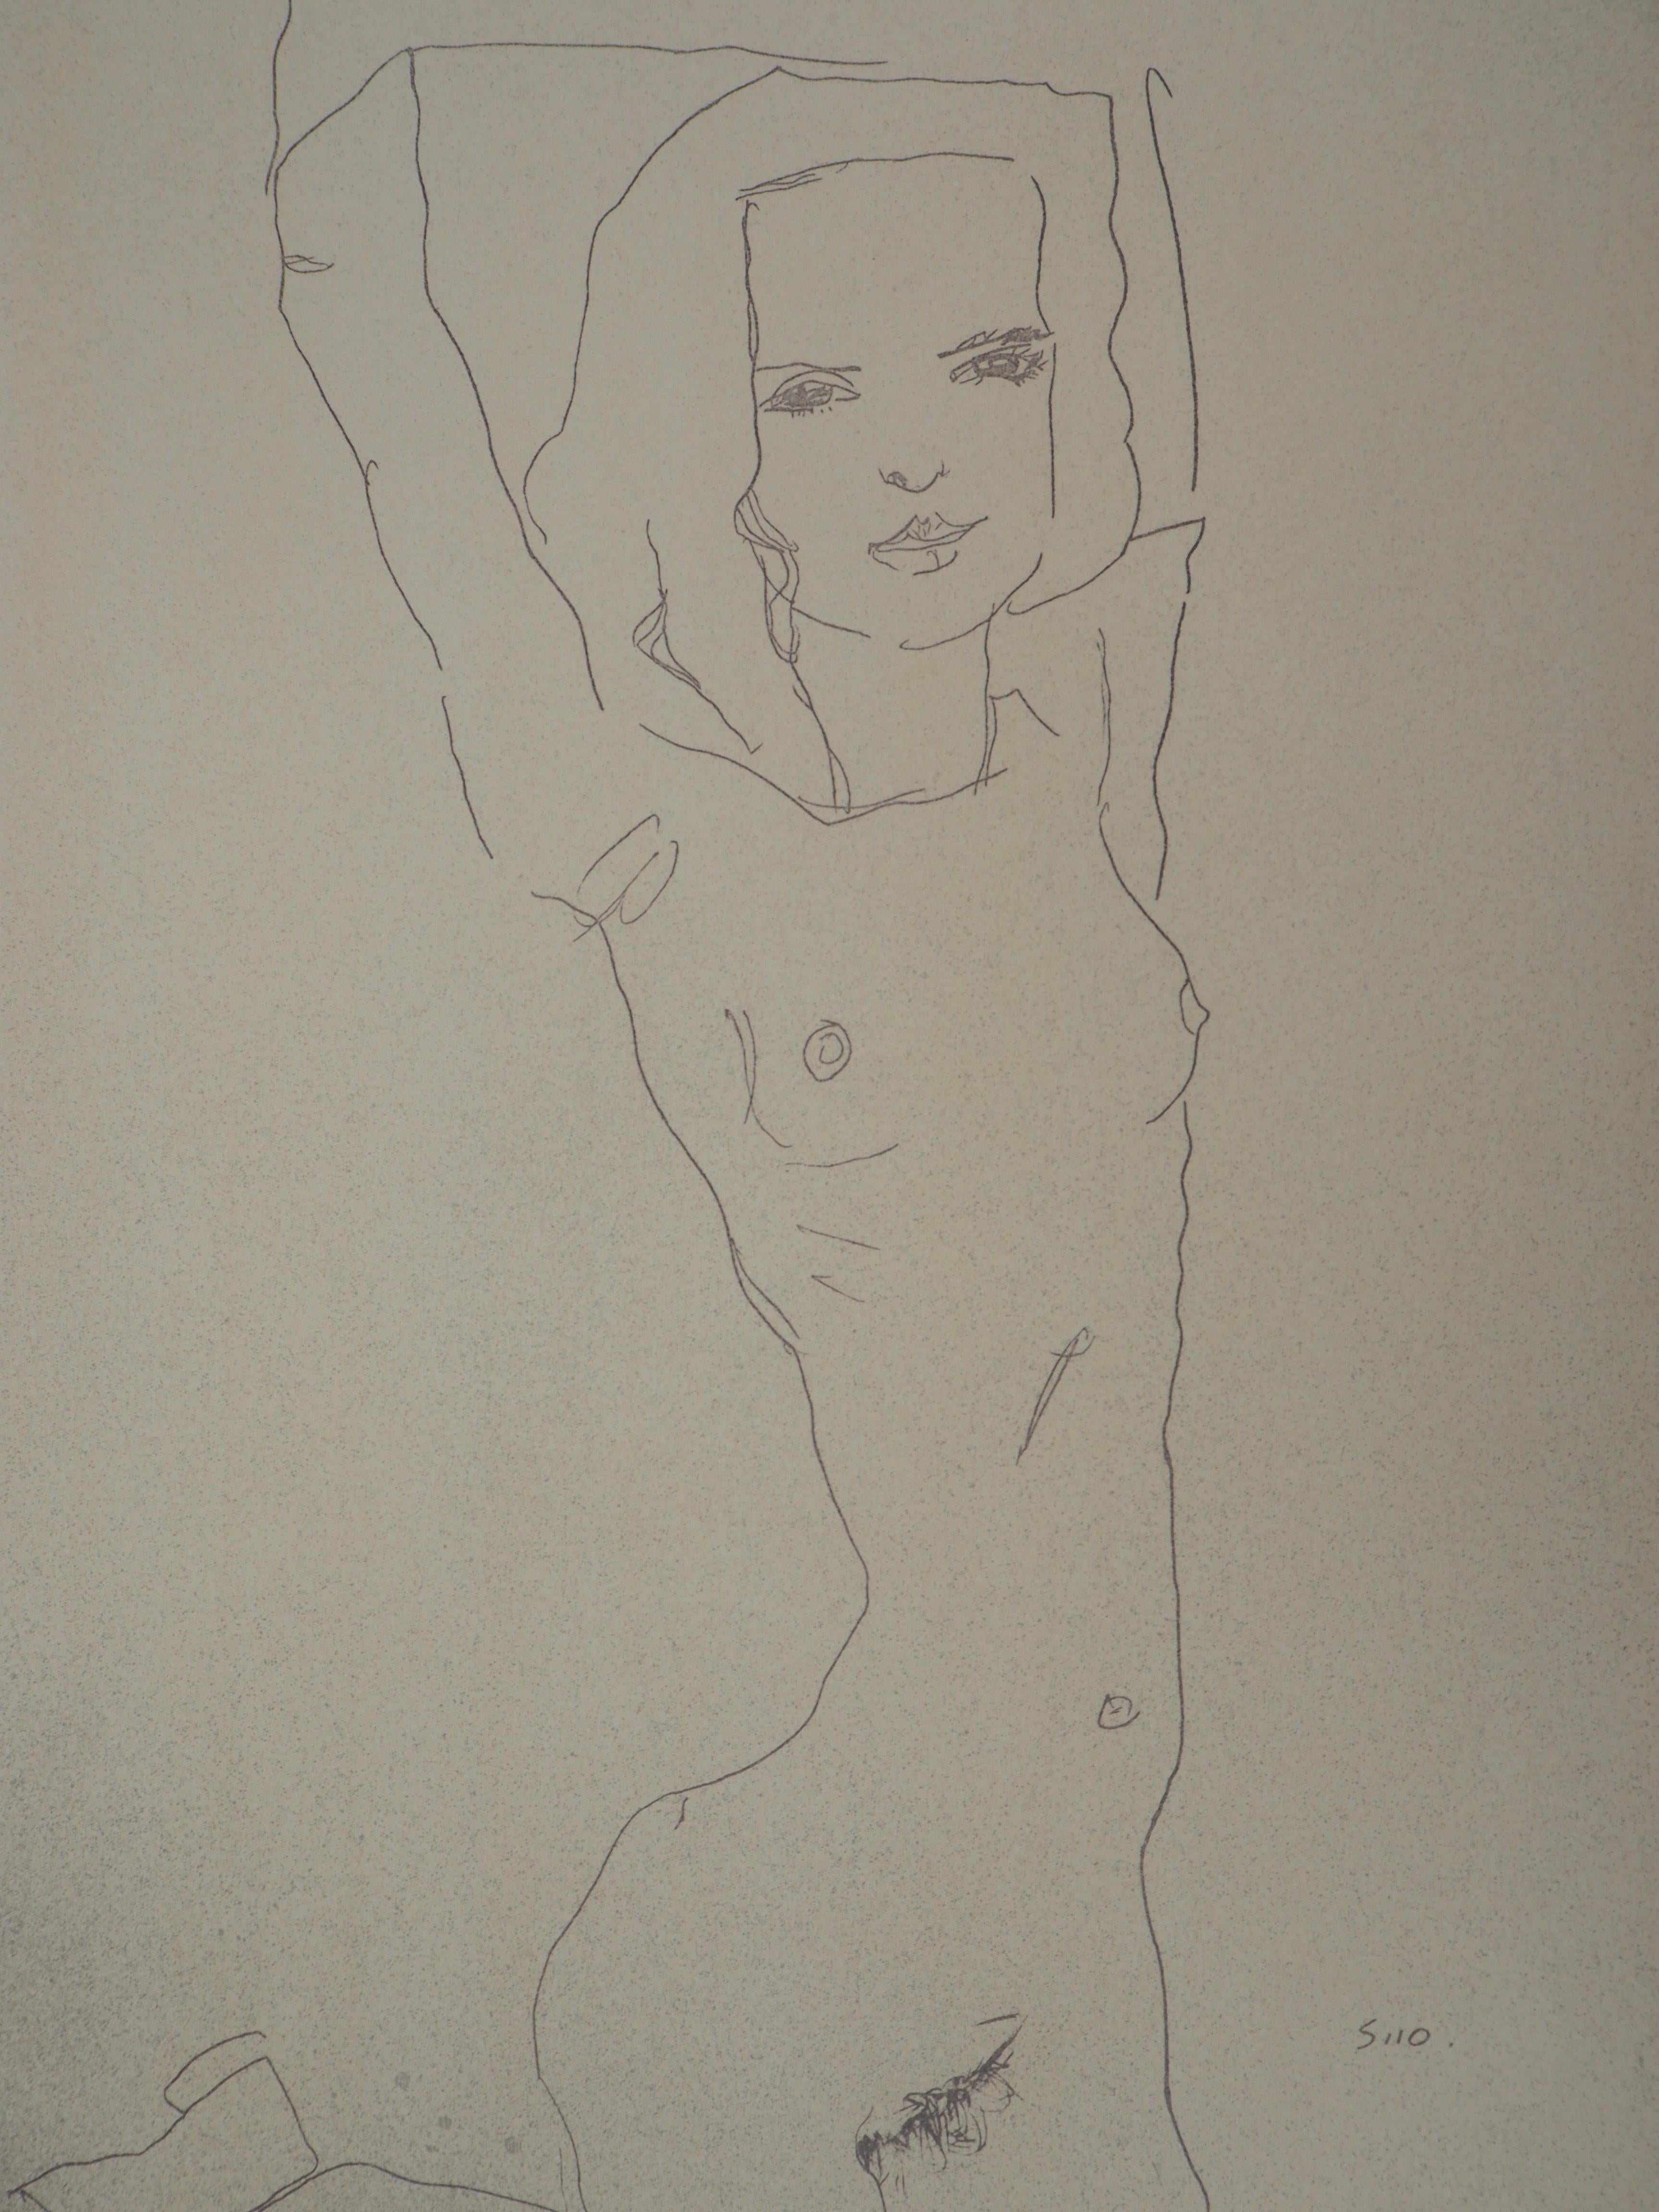 Stretching Woman - Lithograph (Kallir #D579) - Brown Figurative Print by (after) Egon Schiele